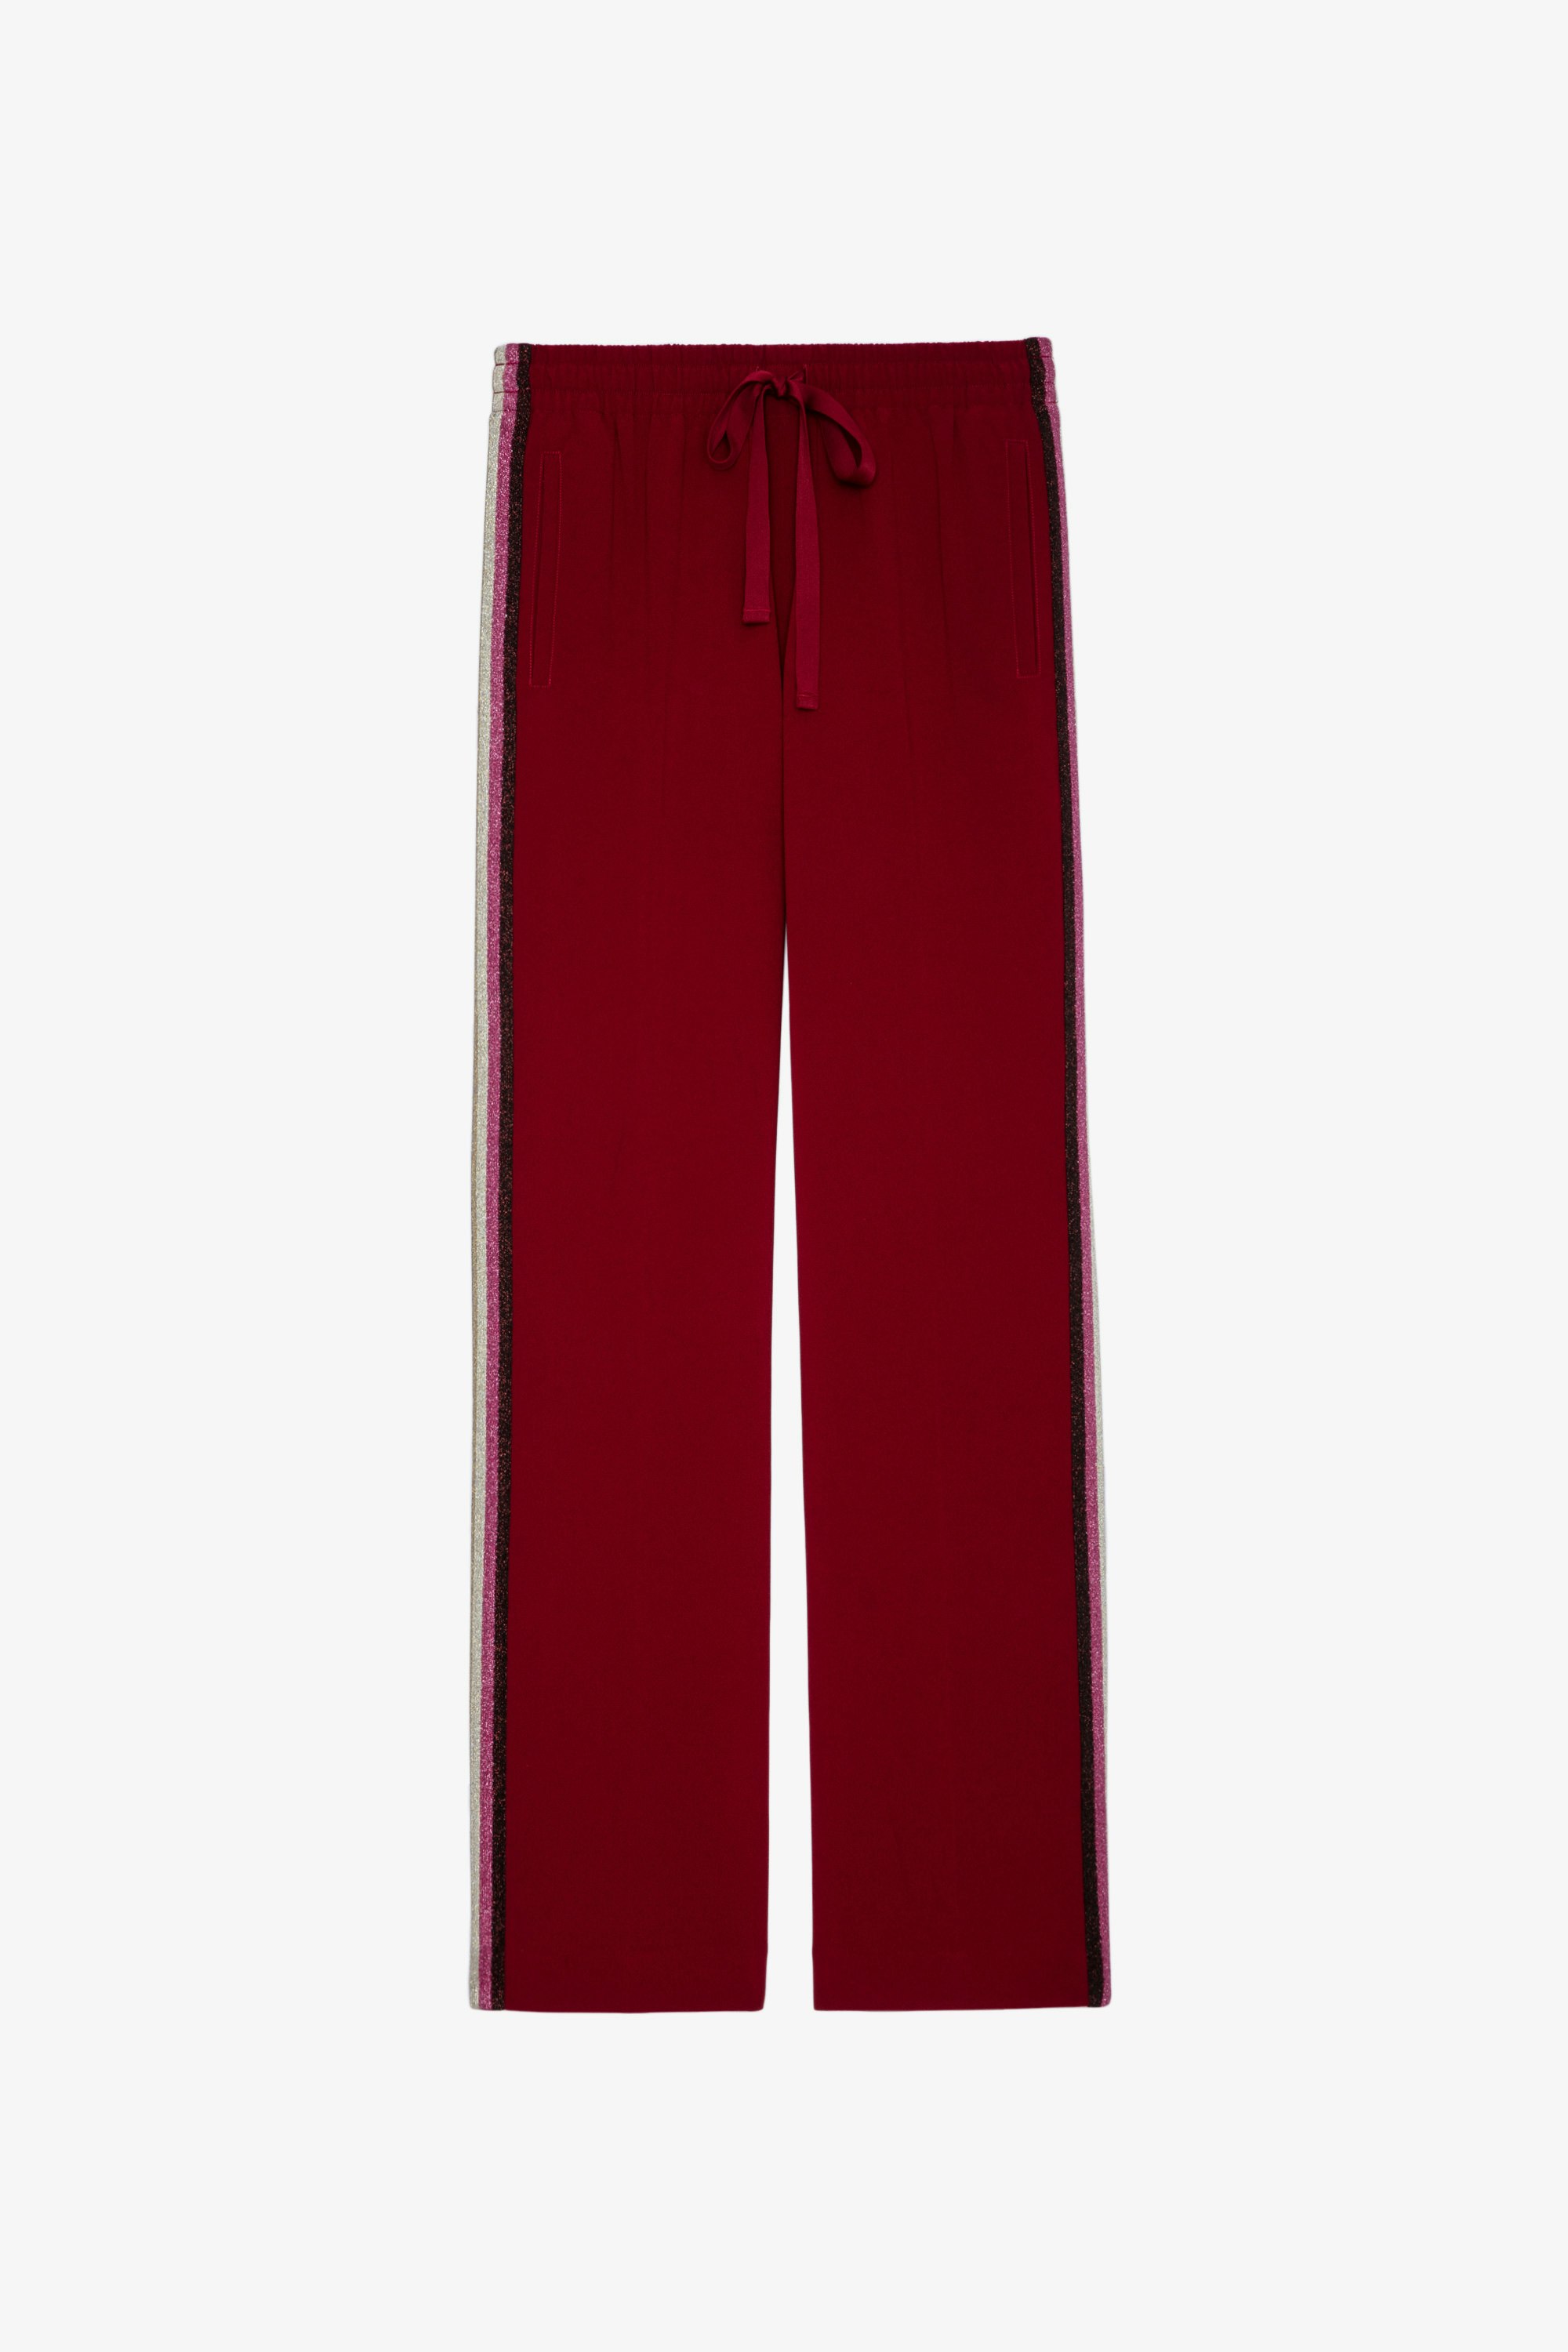 Pomy Crepe Trousers Women’s trousers with coloured glitter side bands